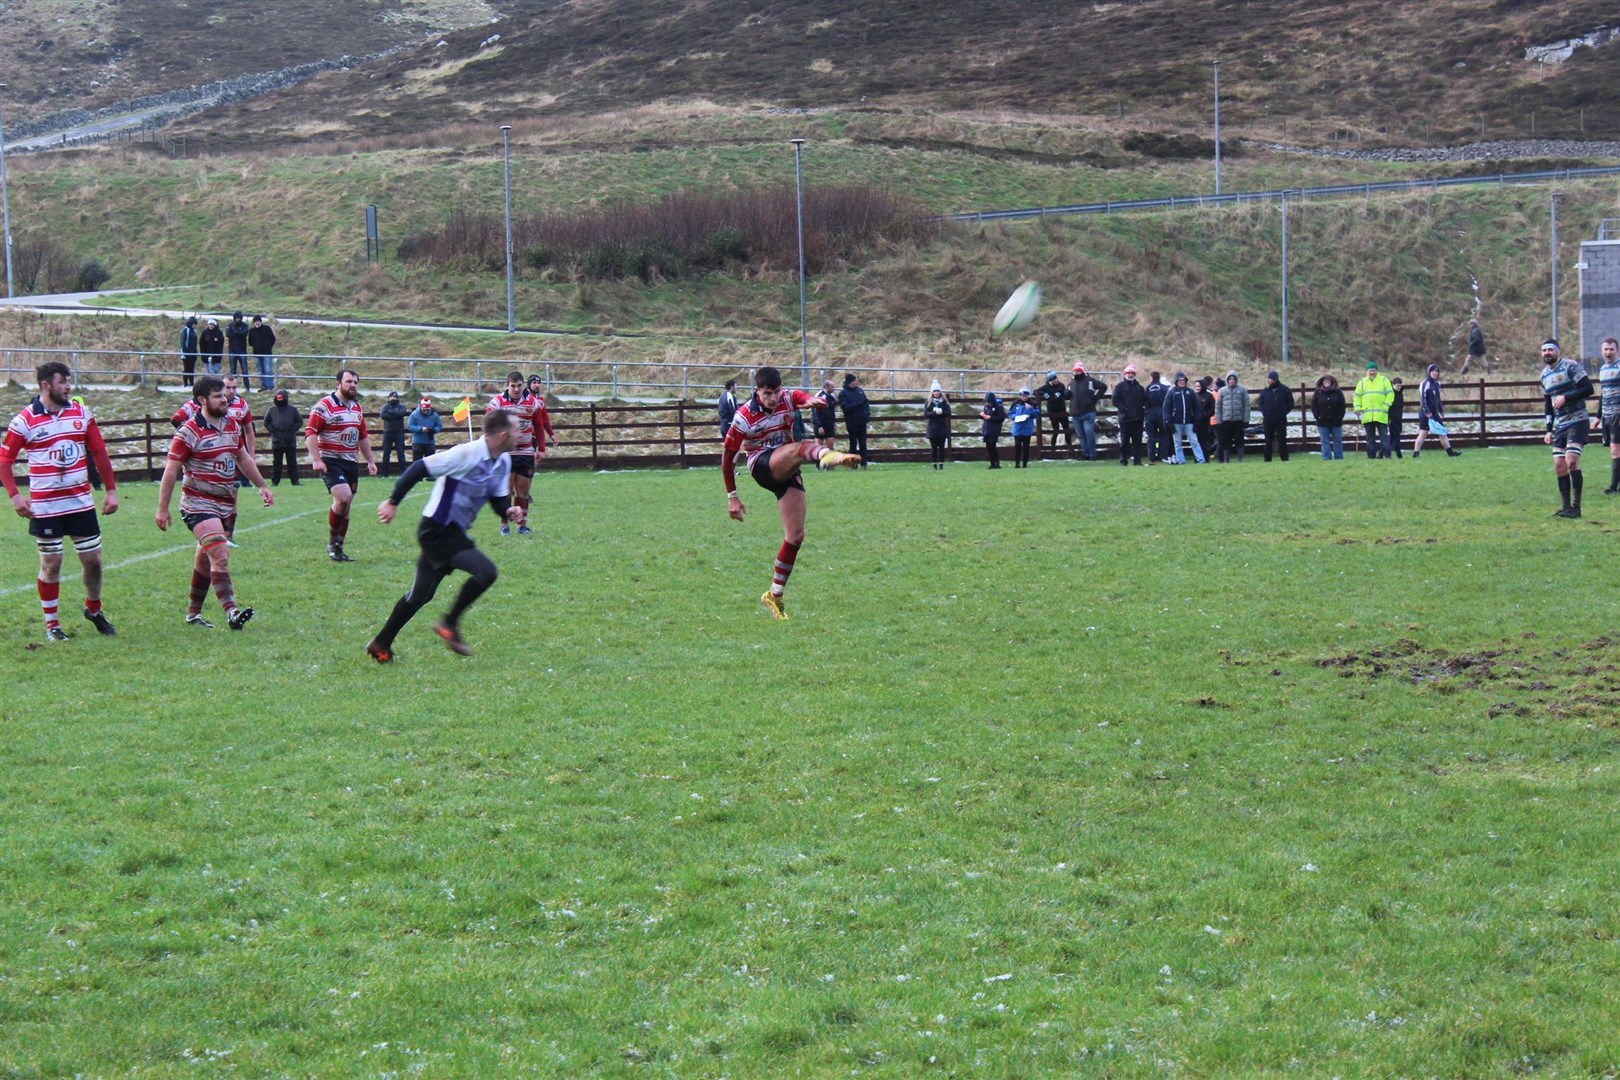 Rory Millar kicking for position from a penalty. Photo: Grant Mitchell